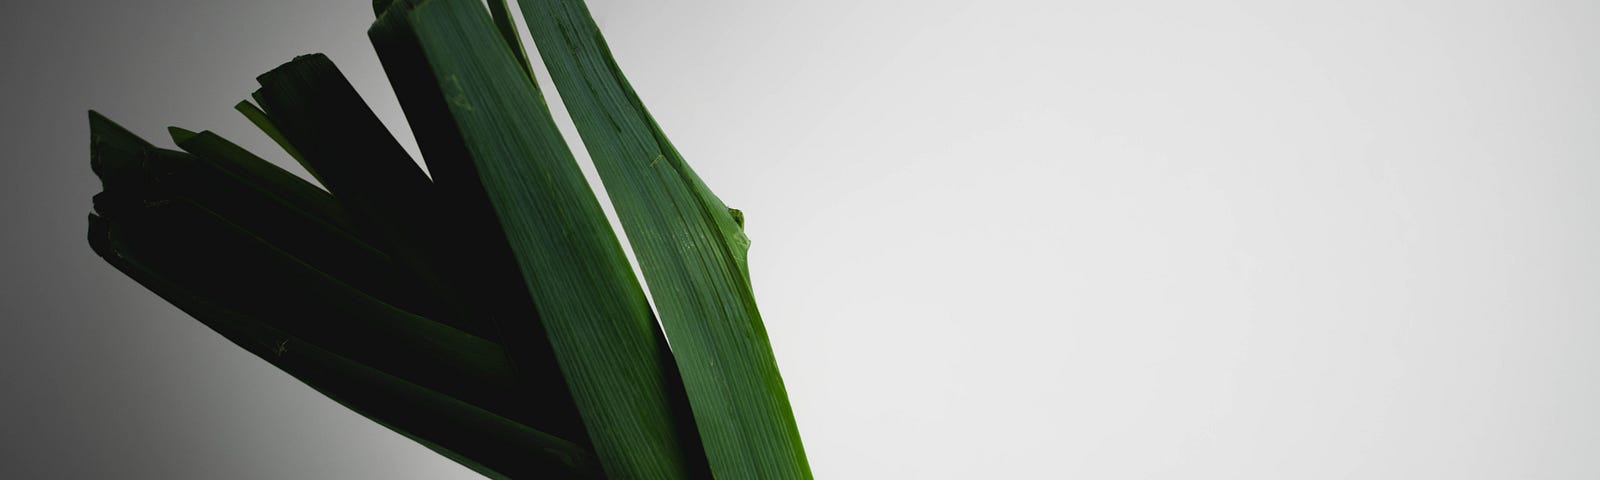 An image with a black bowl and leek standing upright in it. White background, white surface.